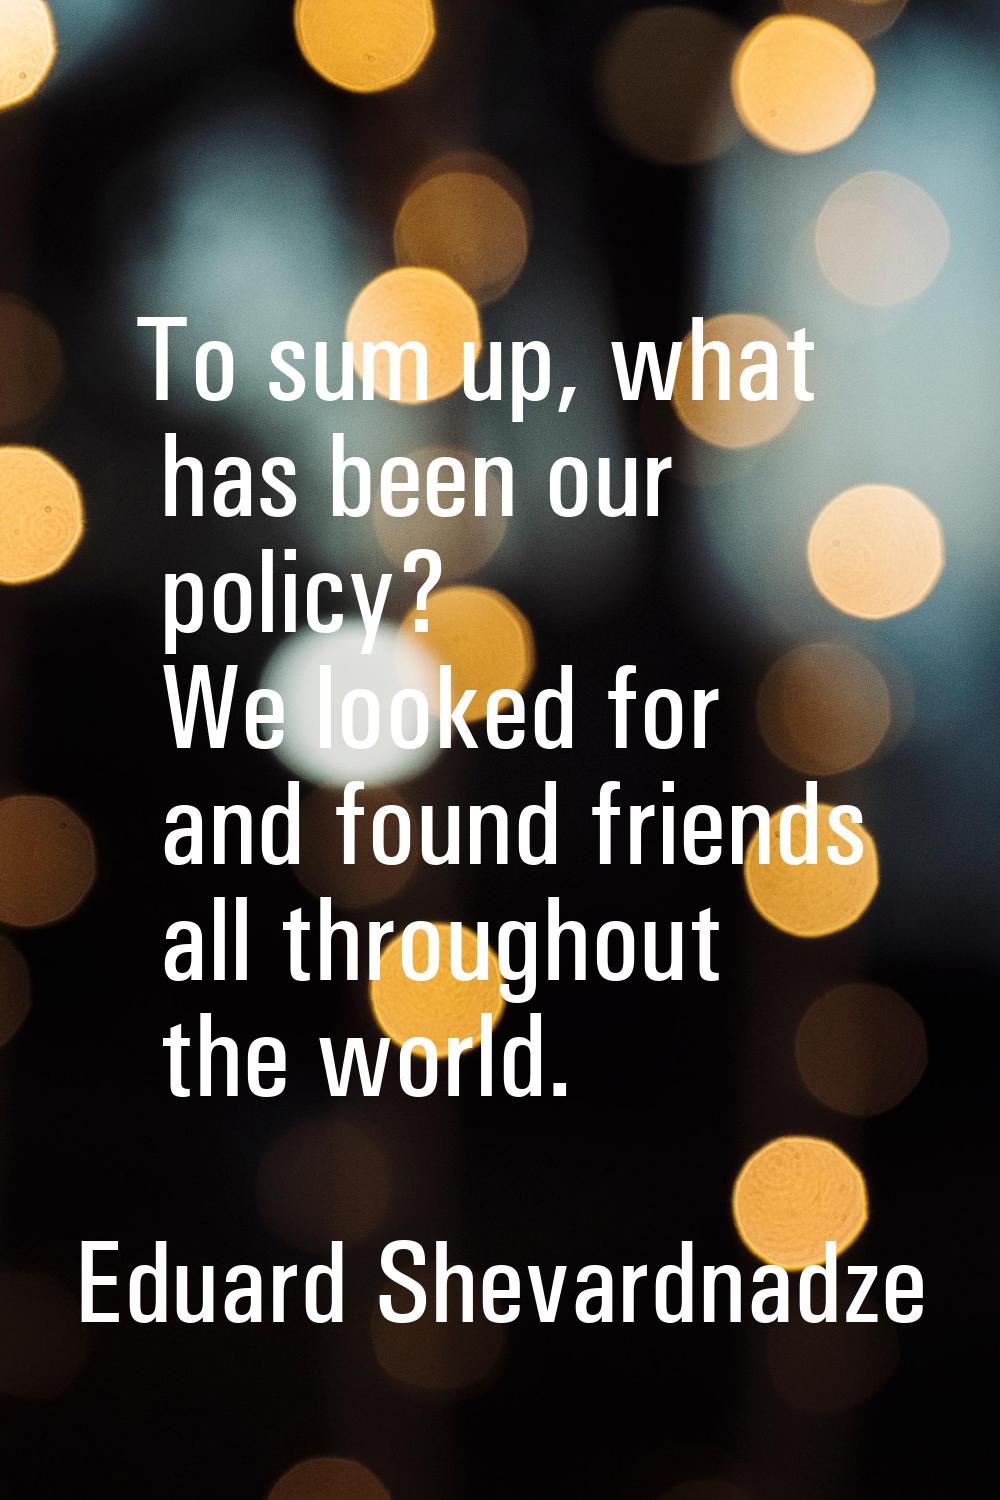 To sum up, what has been our policy? We looked for and found friends all throughout the world.